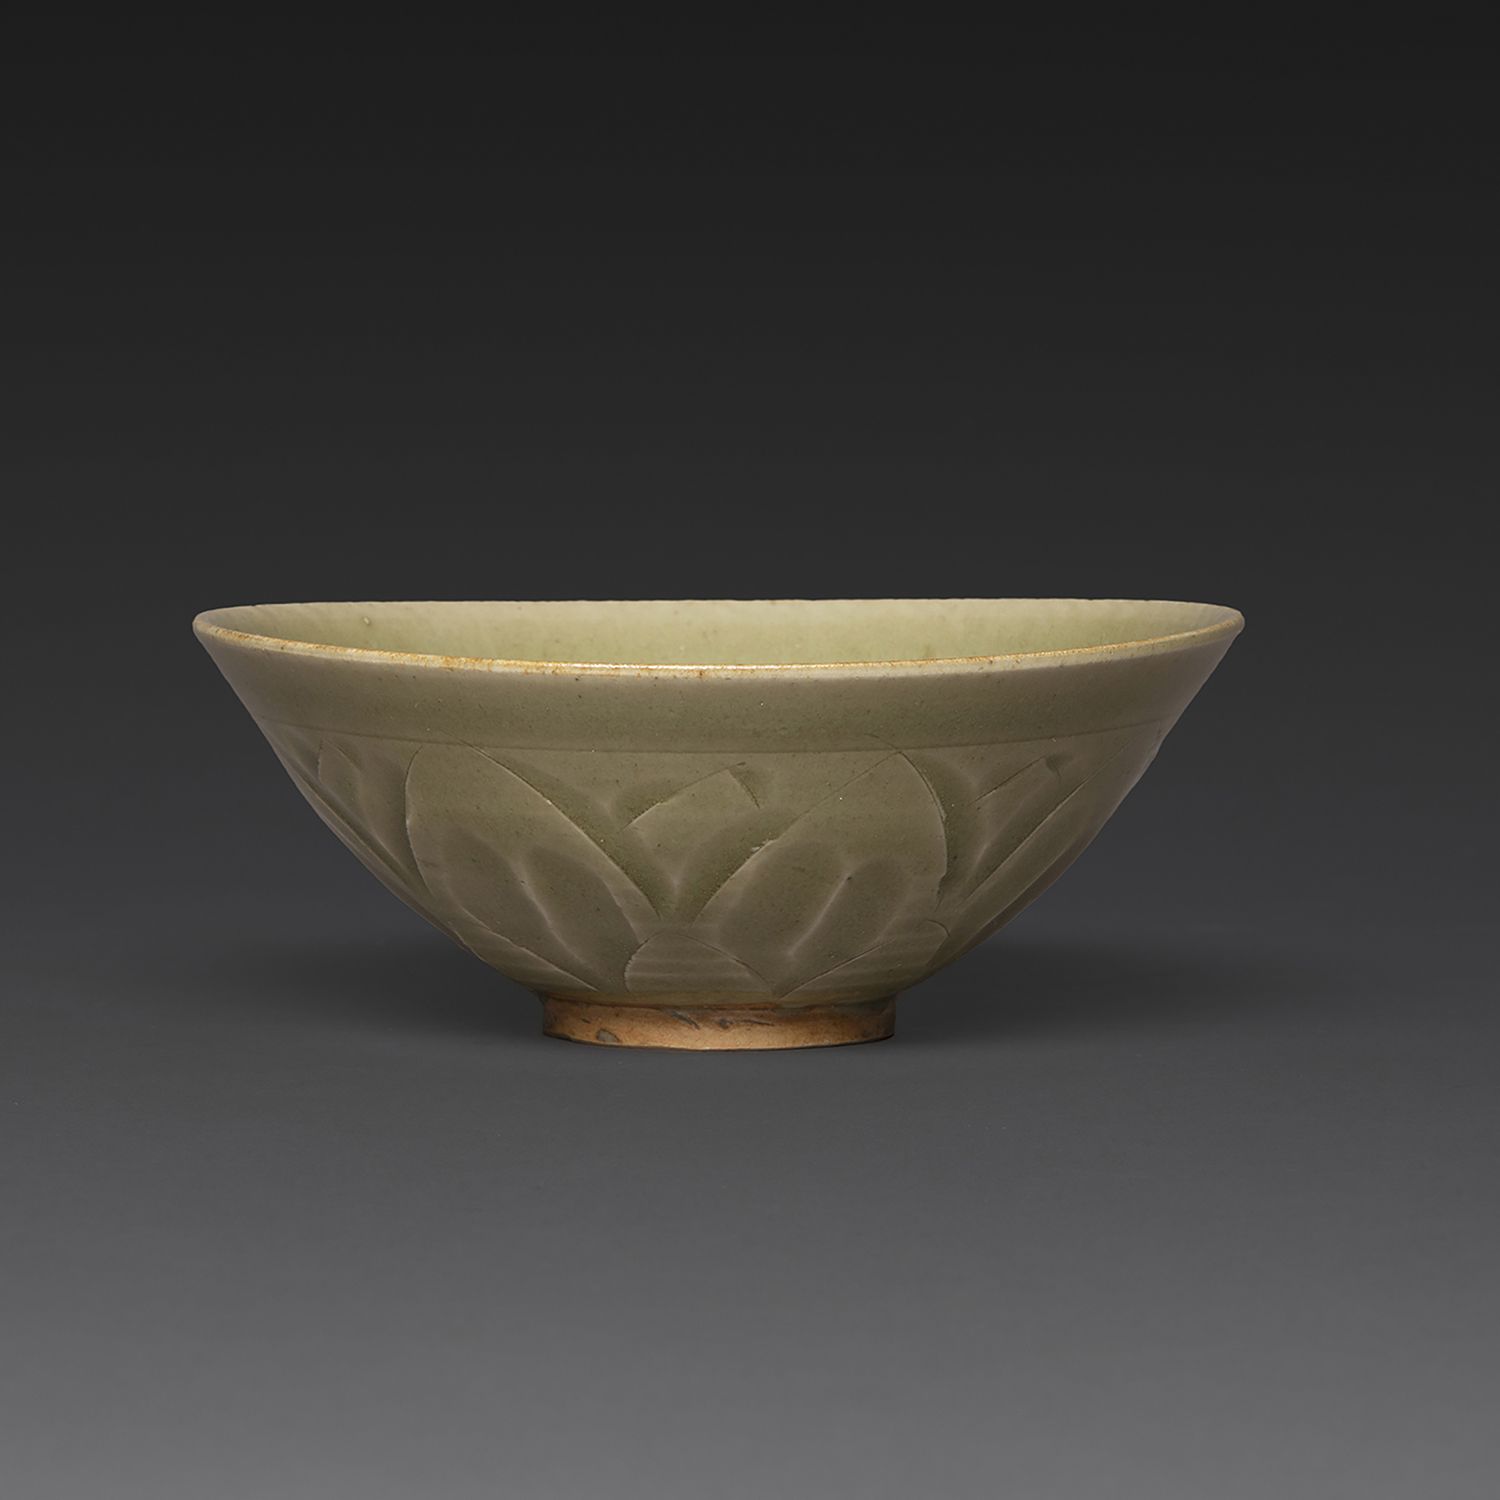 Null YAOZHOU TYPE CUP
in stoneware glazed celadon cracked, with decoration of pe&hellip;